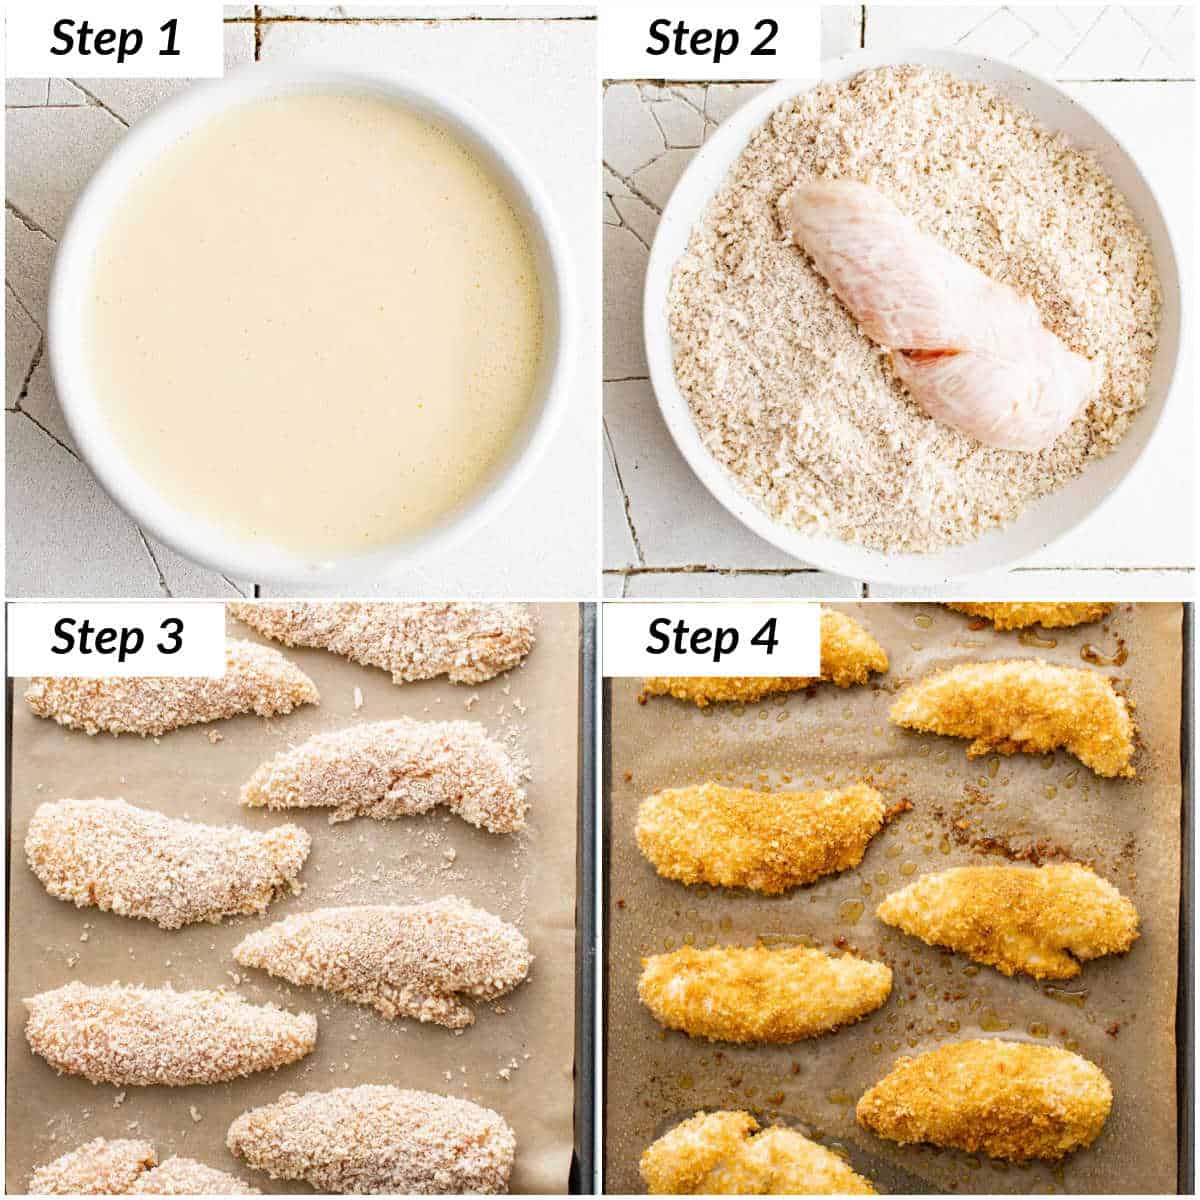 image collage showing the steps for making baked chicken tender in oven